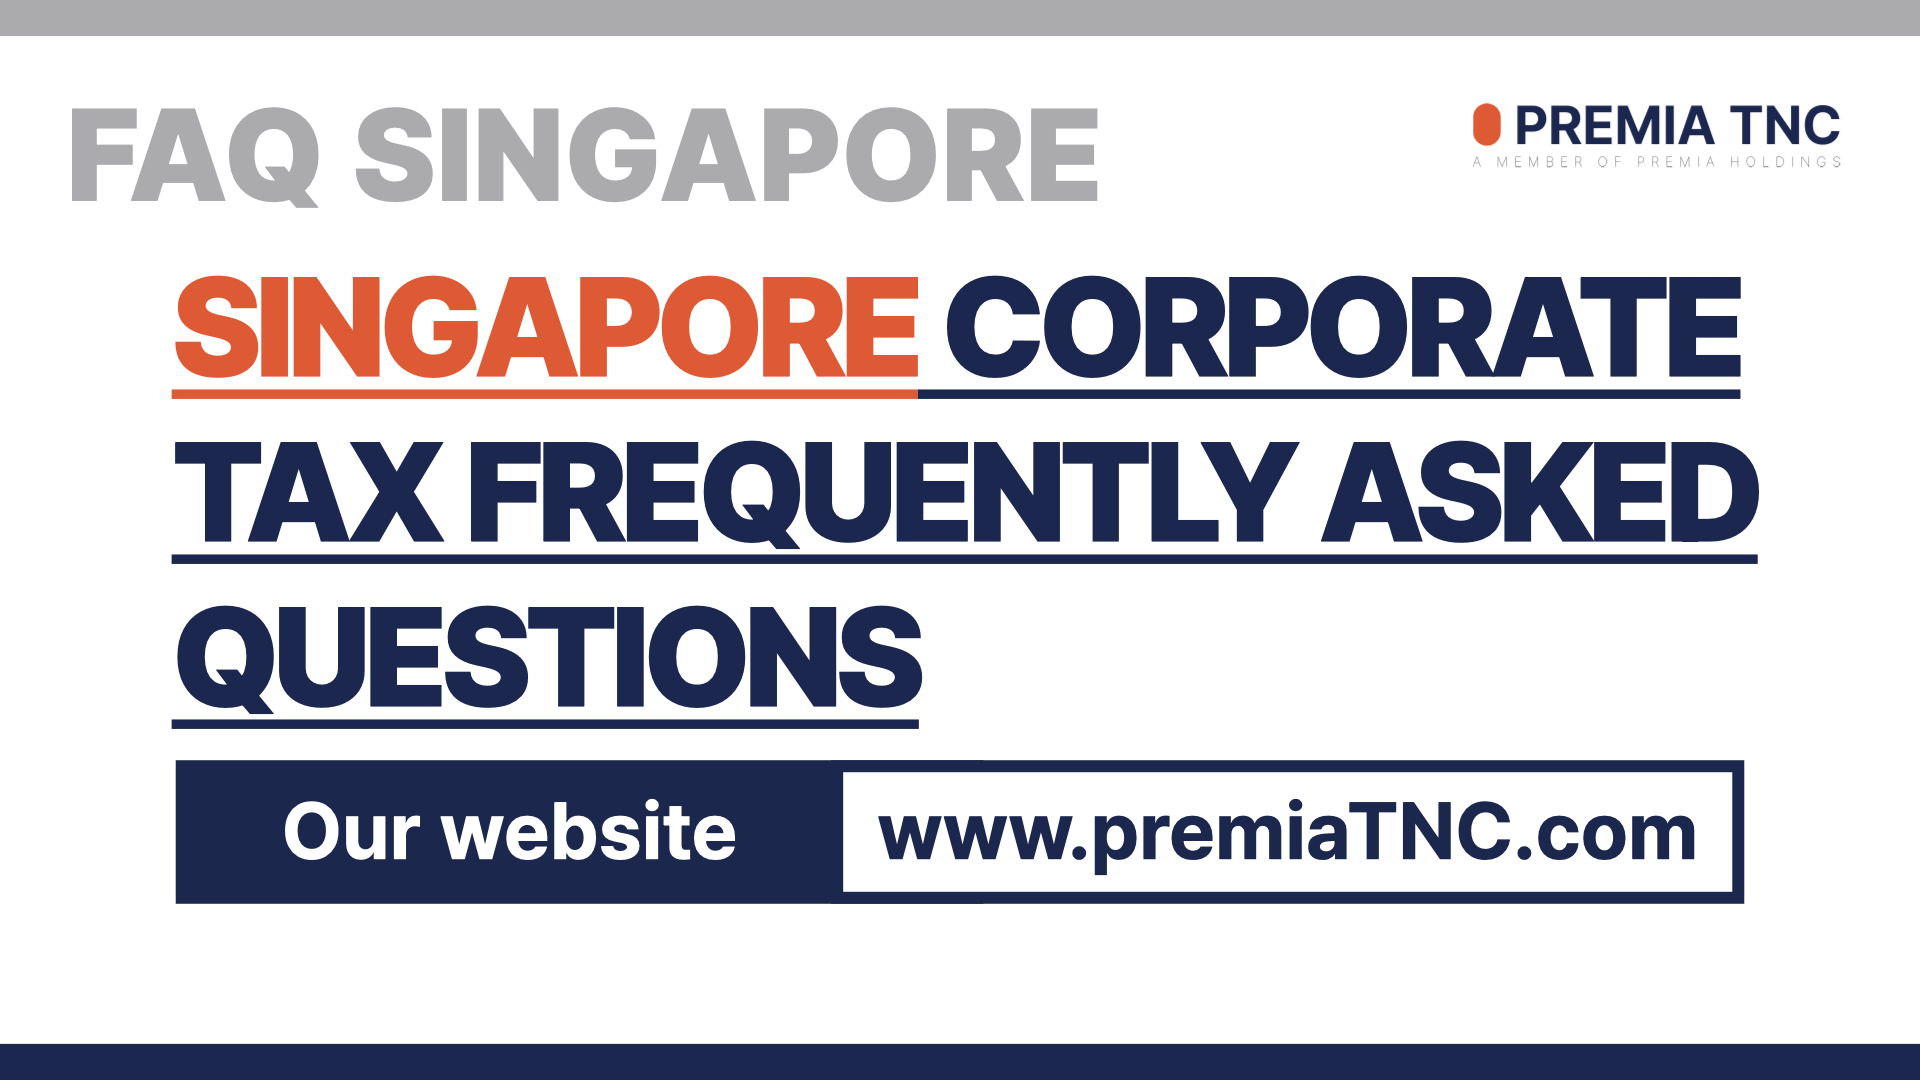 Singapore Corporate Tax Frequently Asked Questions